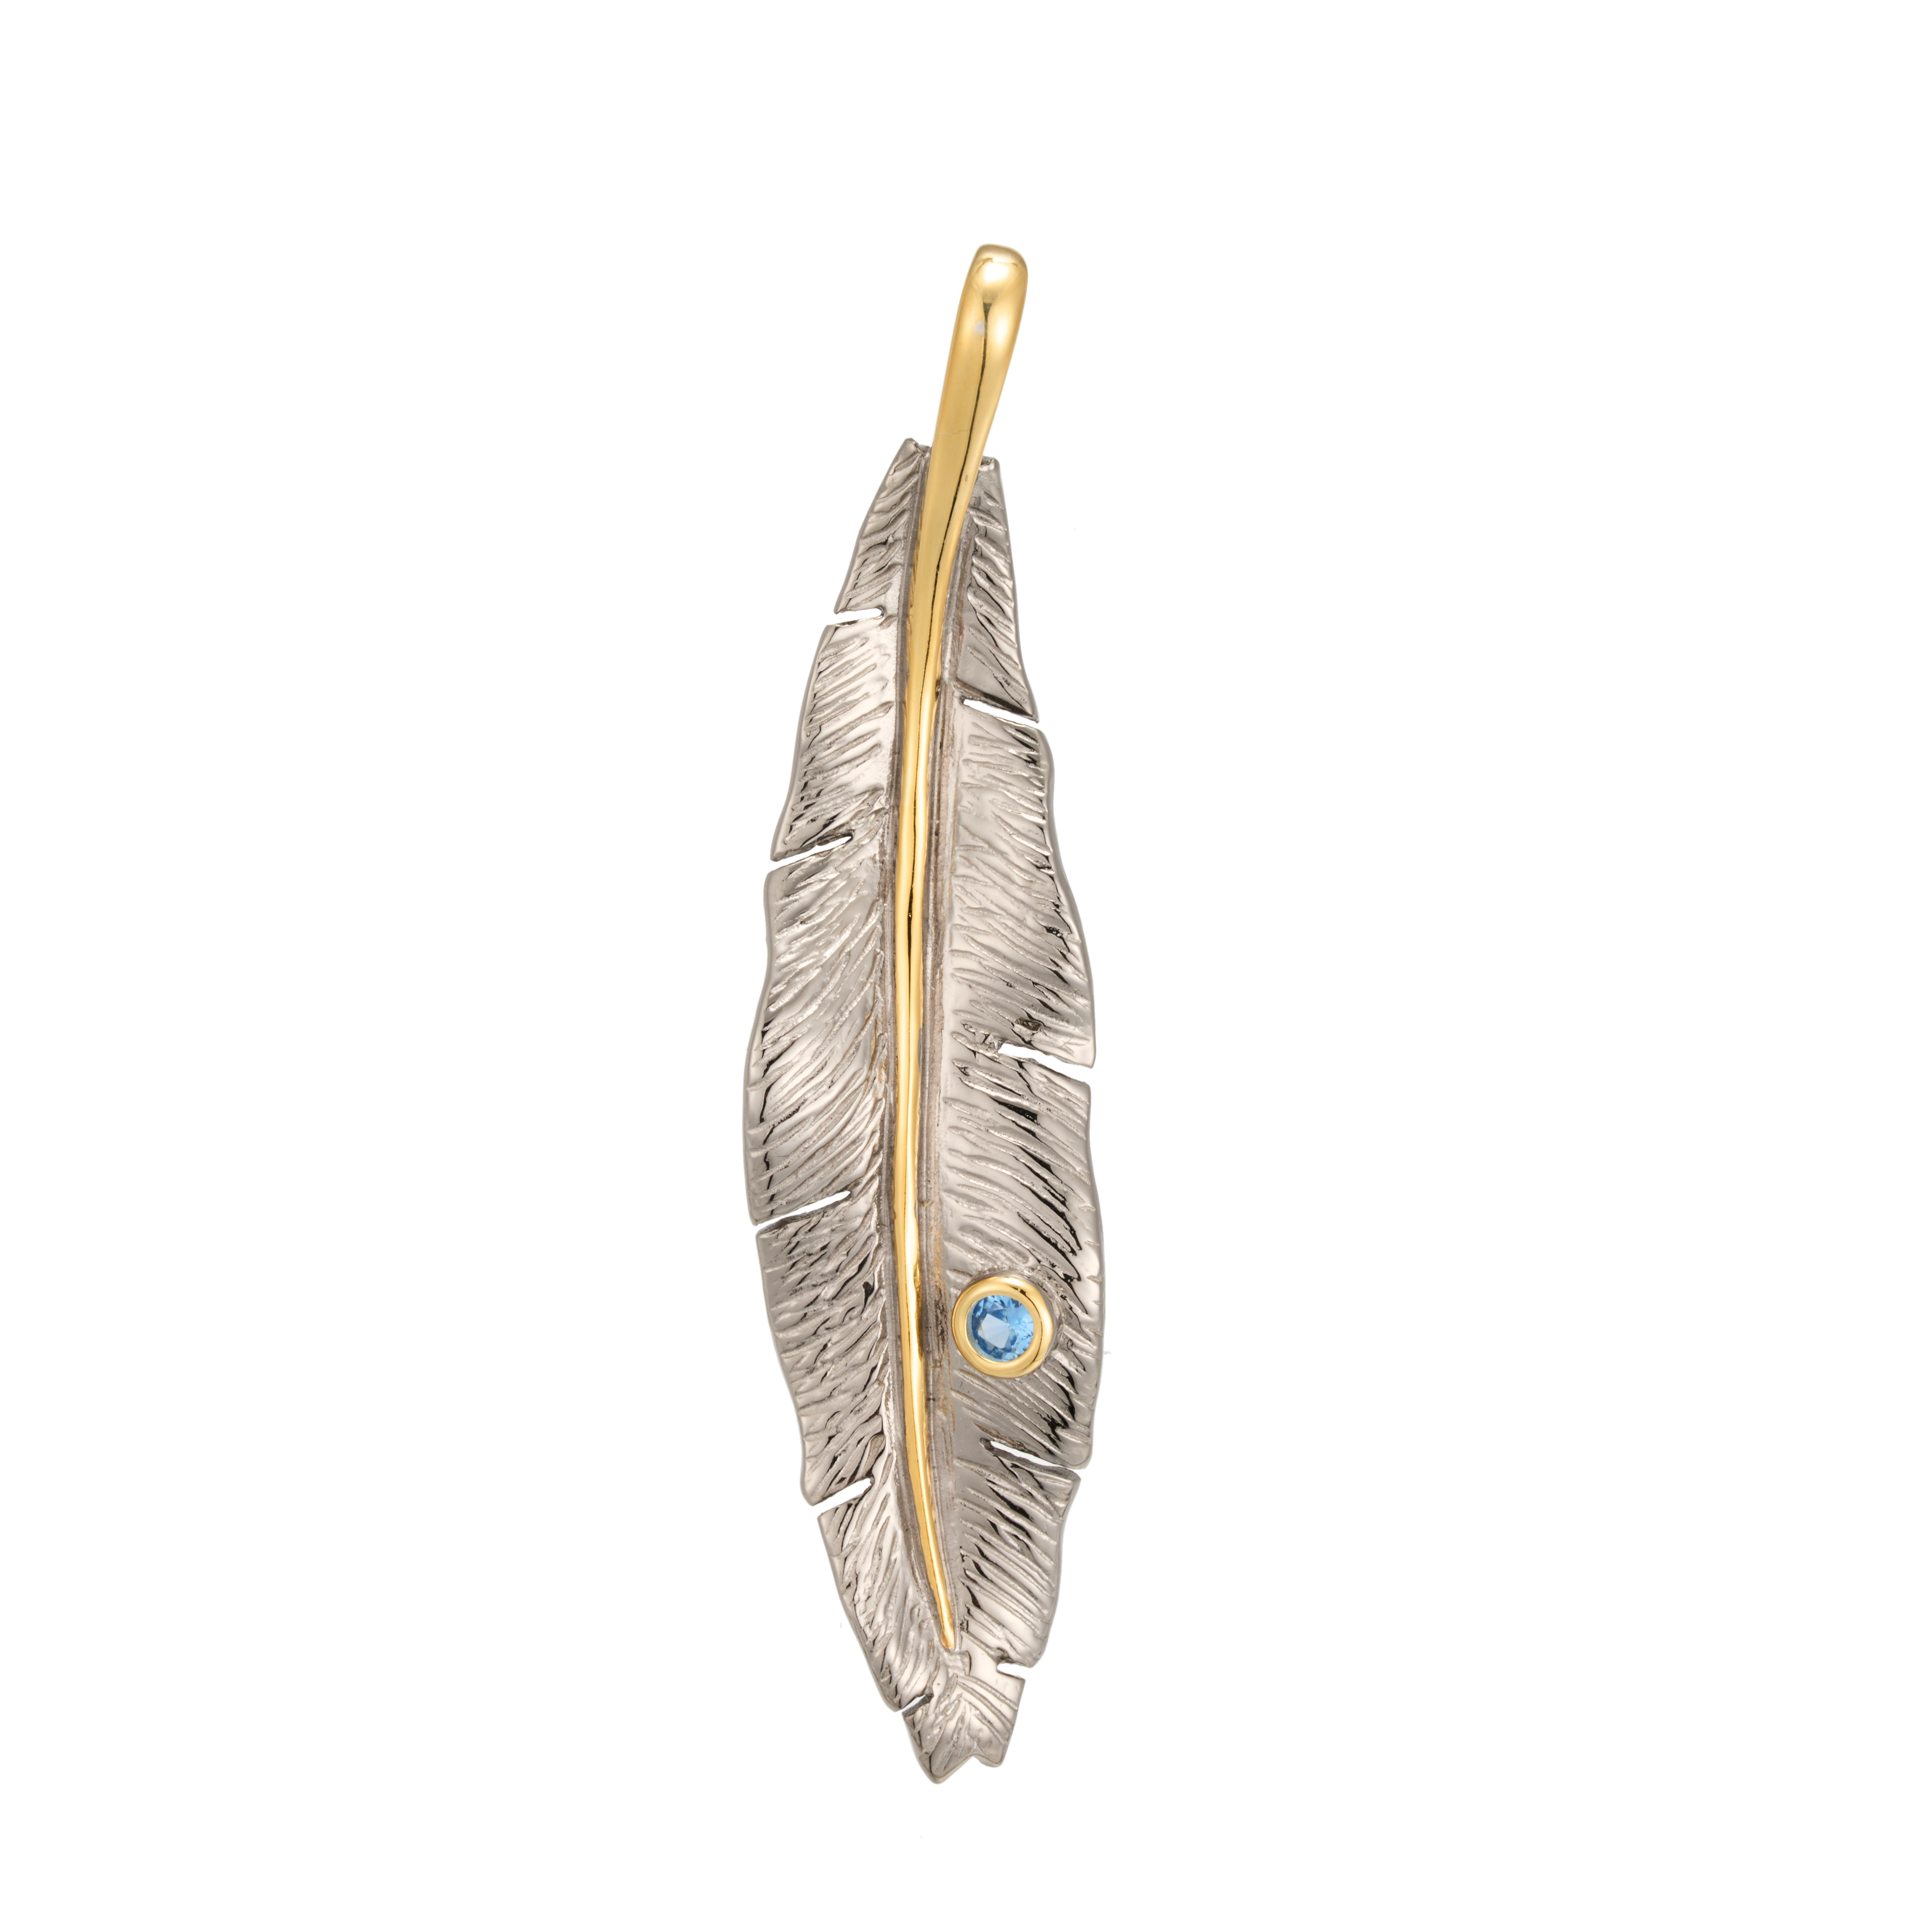 Factory wholesale custom-made S925 pure silver inlaid blue topaz vintage feather pendant jewelry handmade.